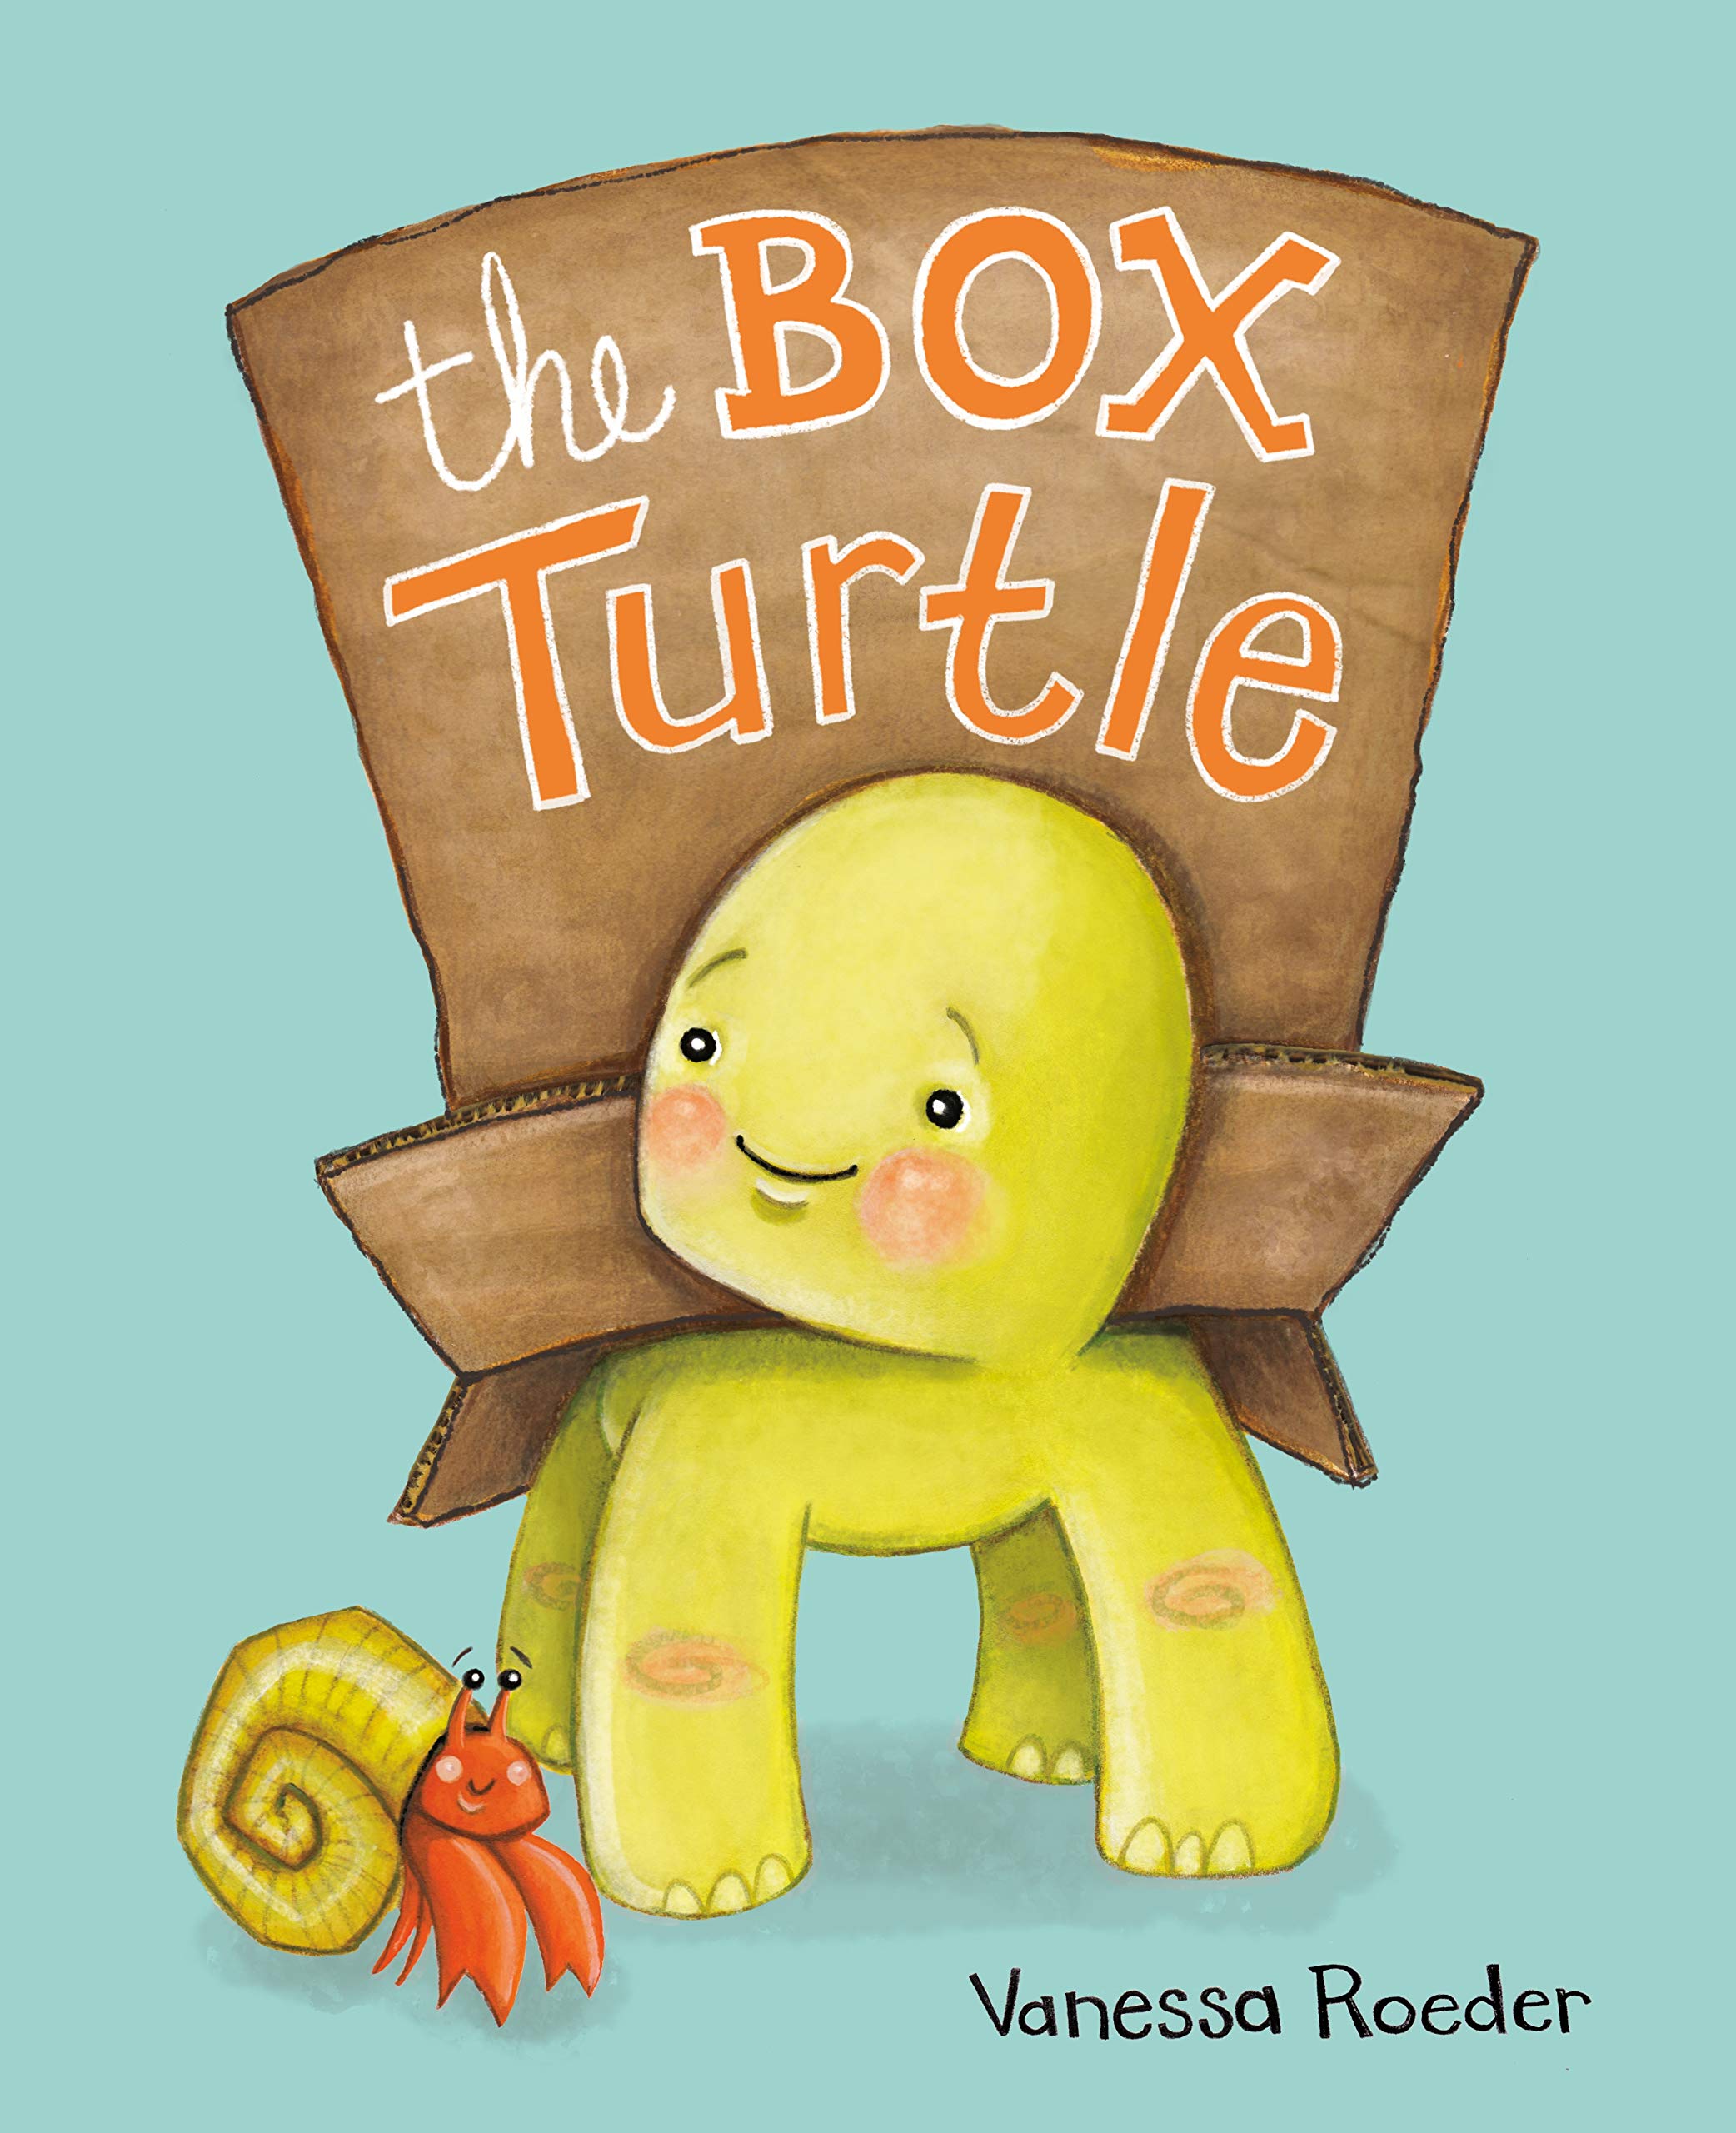 cover photo of The Box Turtle, a children's book by Vanessa Roeder